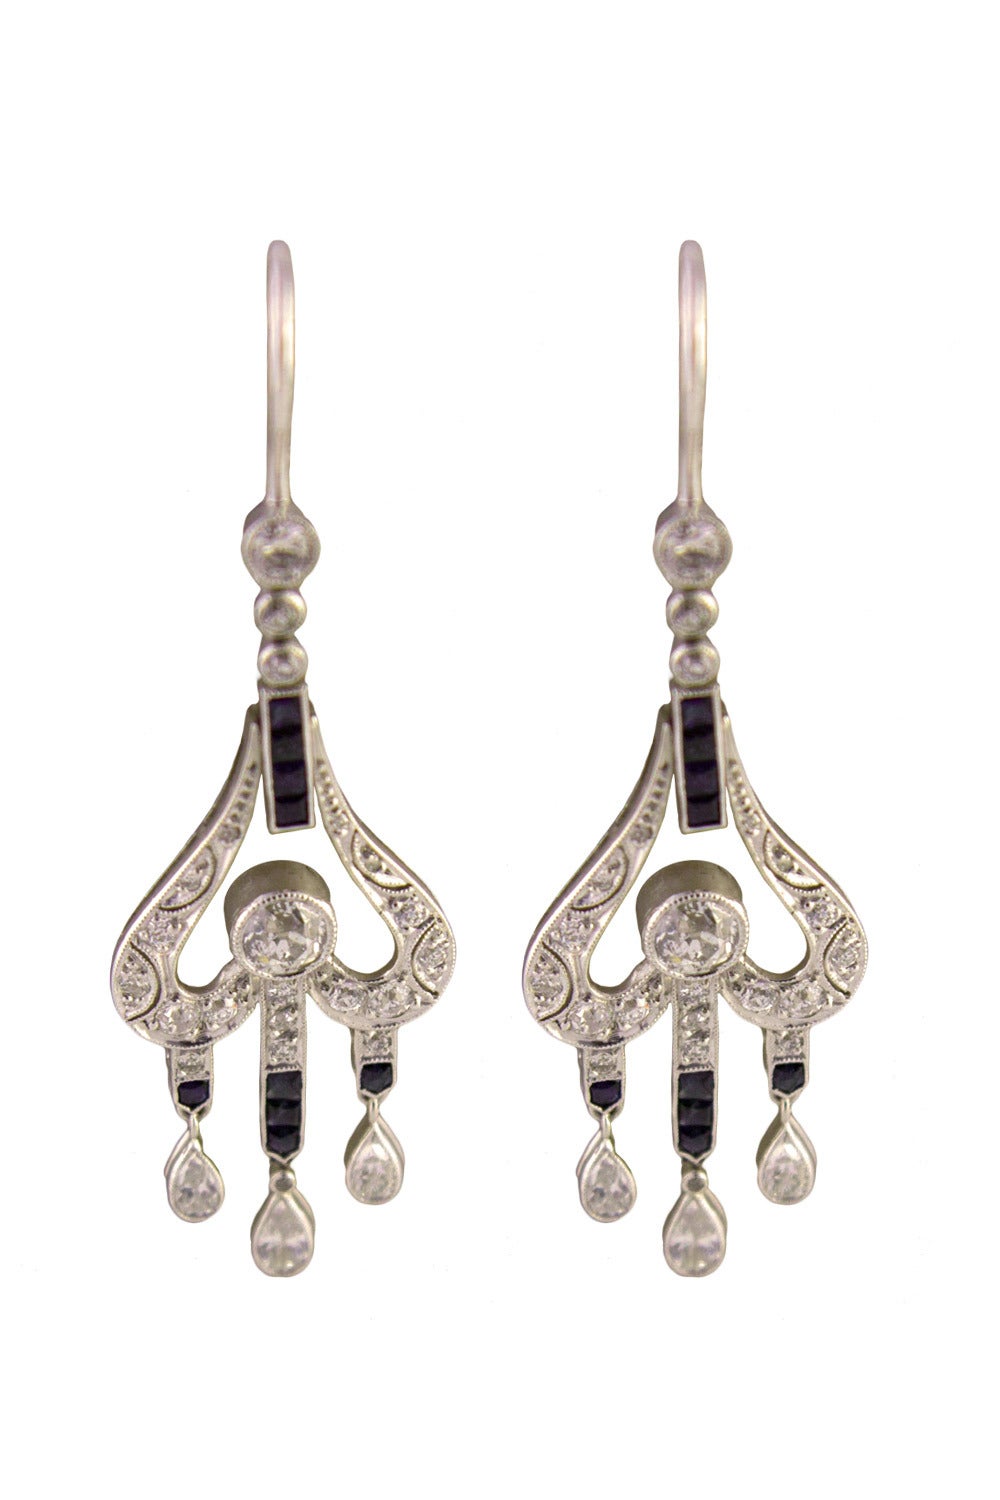 Belle Epoque chandelier earrings, oriental style, with blue sapphires, OBC diamonds and three small pear shaped diamonds on each earring.
Total sapphires and diamonds approx. 5 ct, Platinum